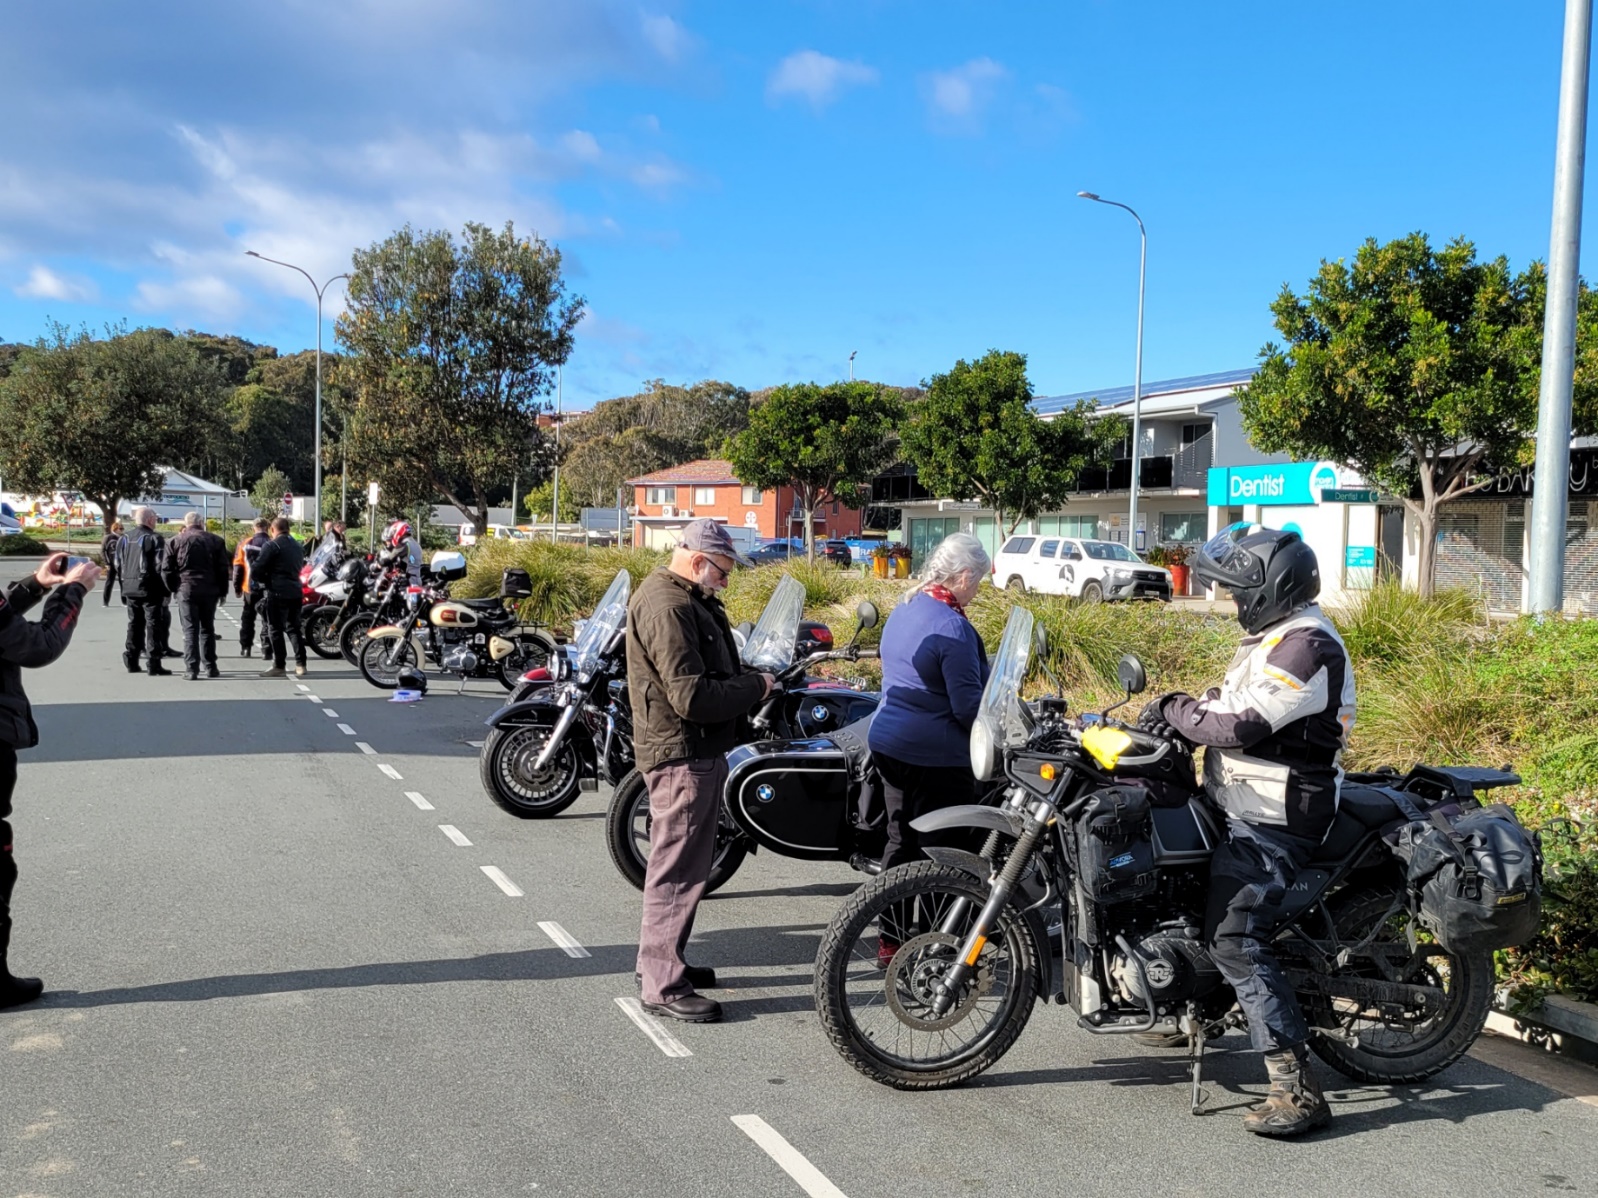 A group of people stand around motorcycles Description automatically generated with low confidence